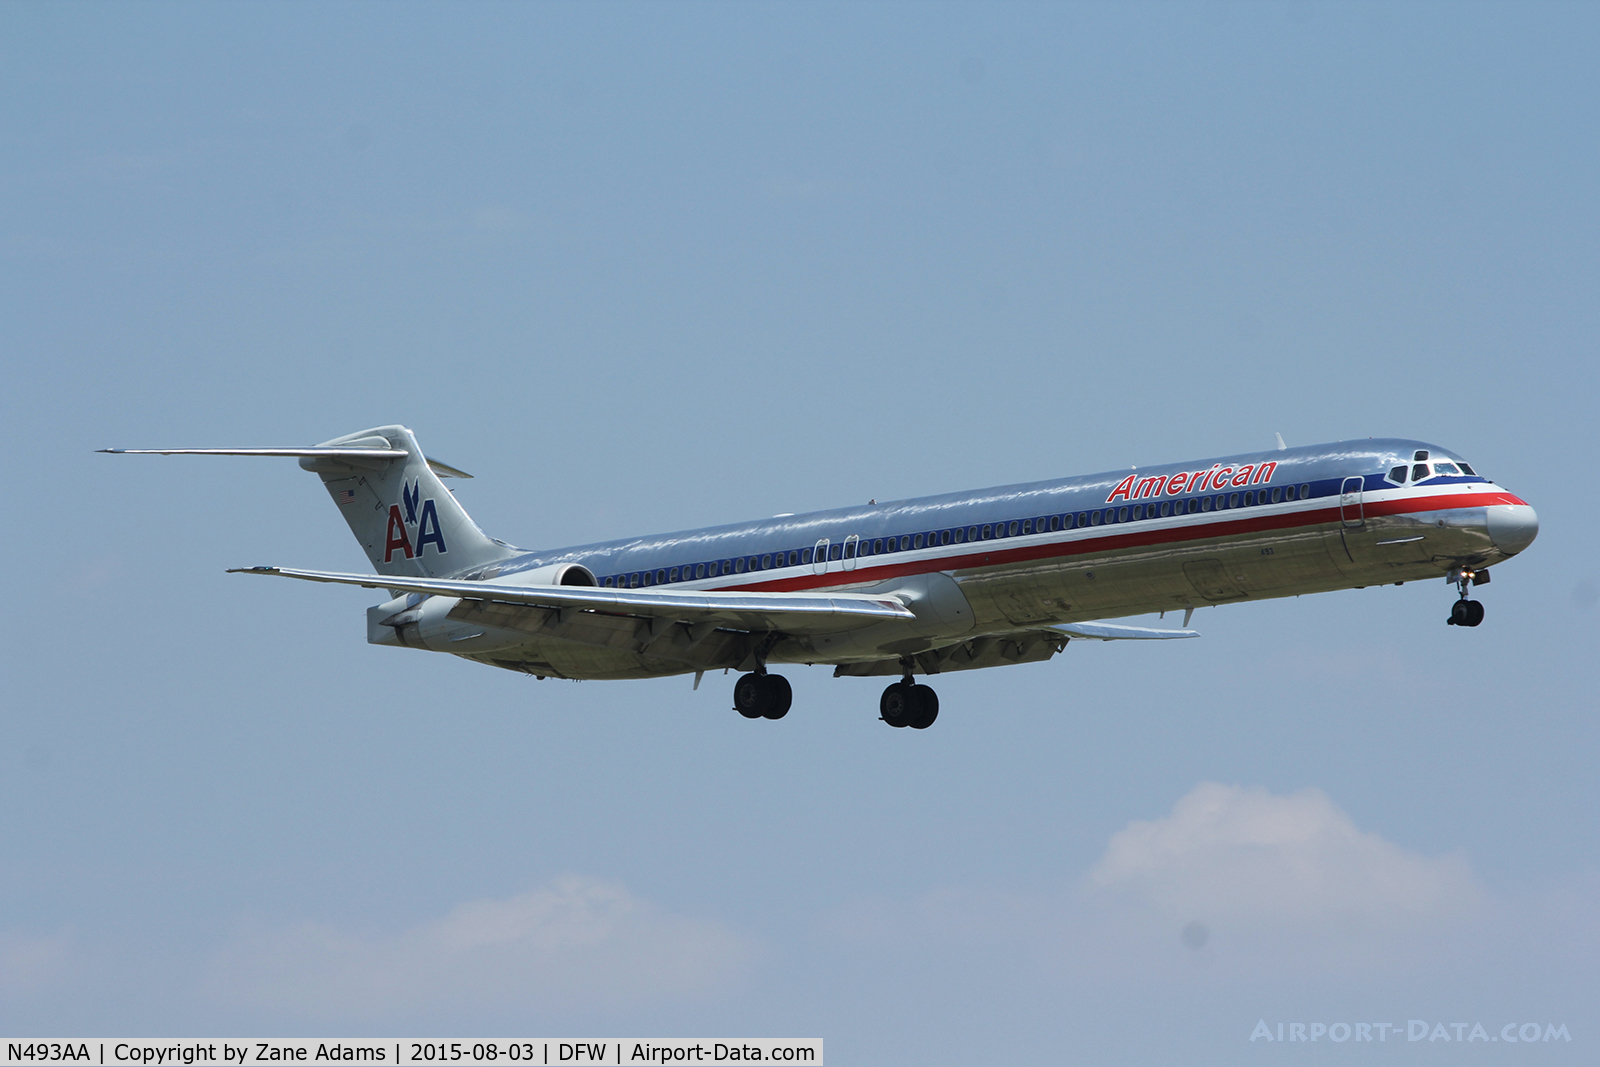 N493AA, 1989 McDonnell Douglas MD-82 (DC-9-82) C/N 49731, At DFW Airport